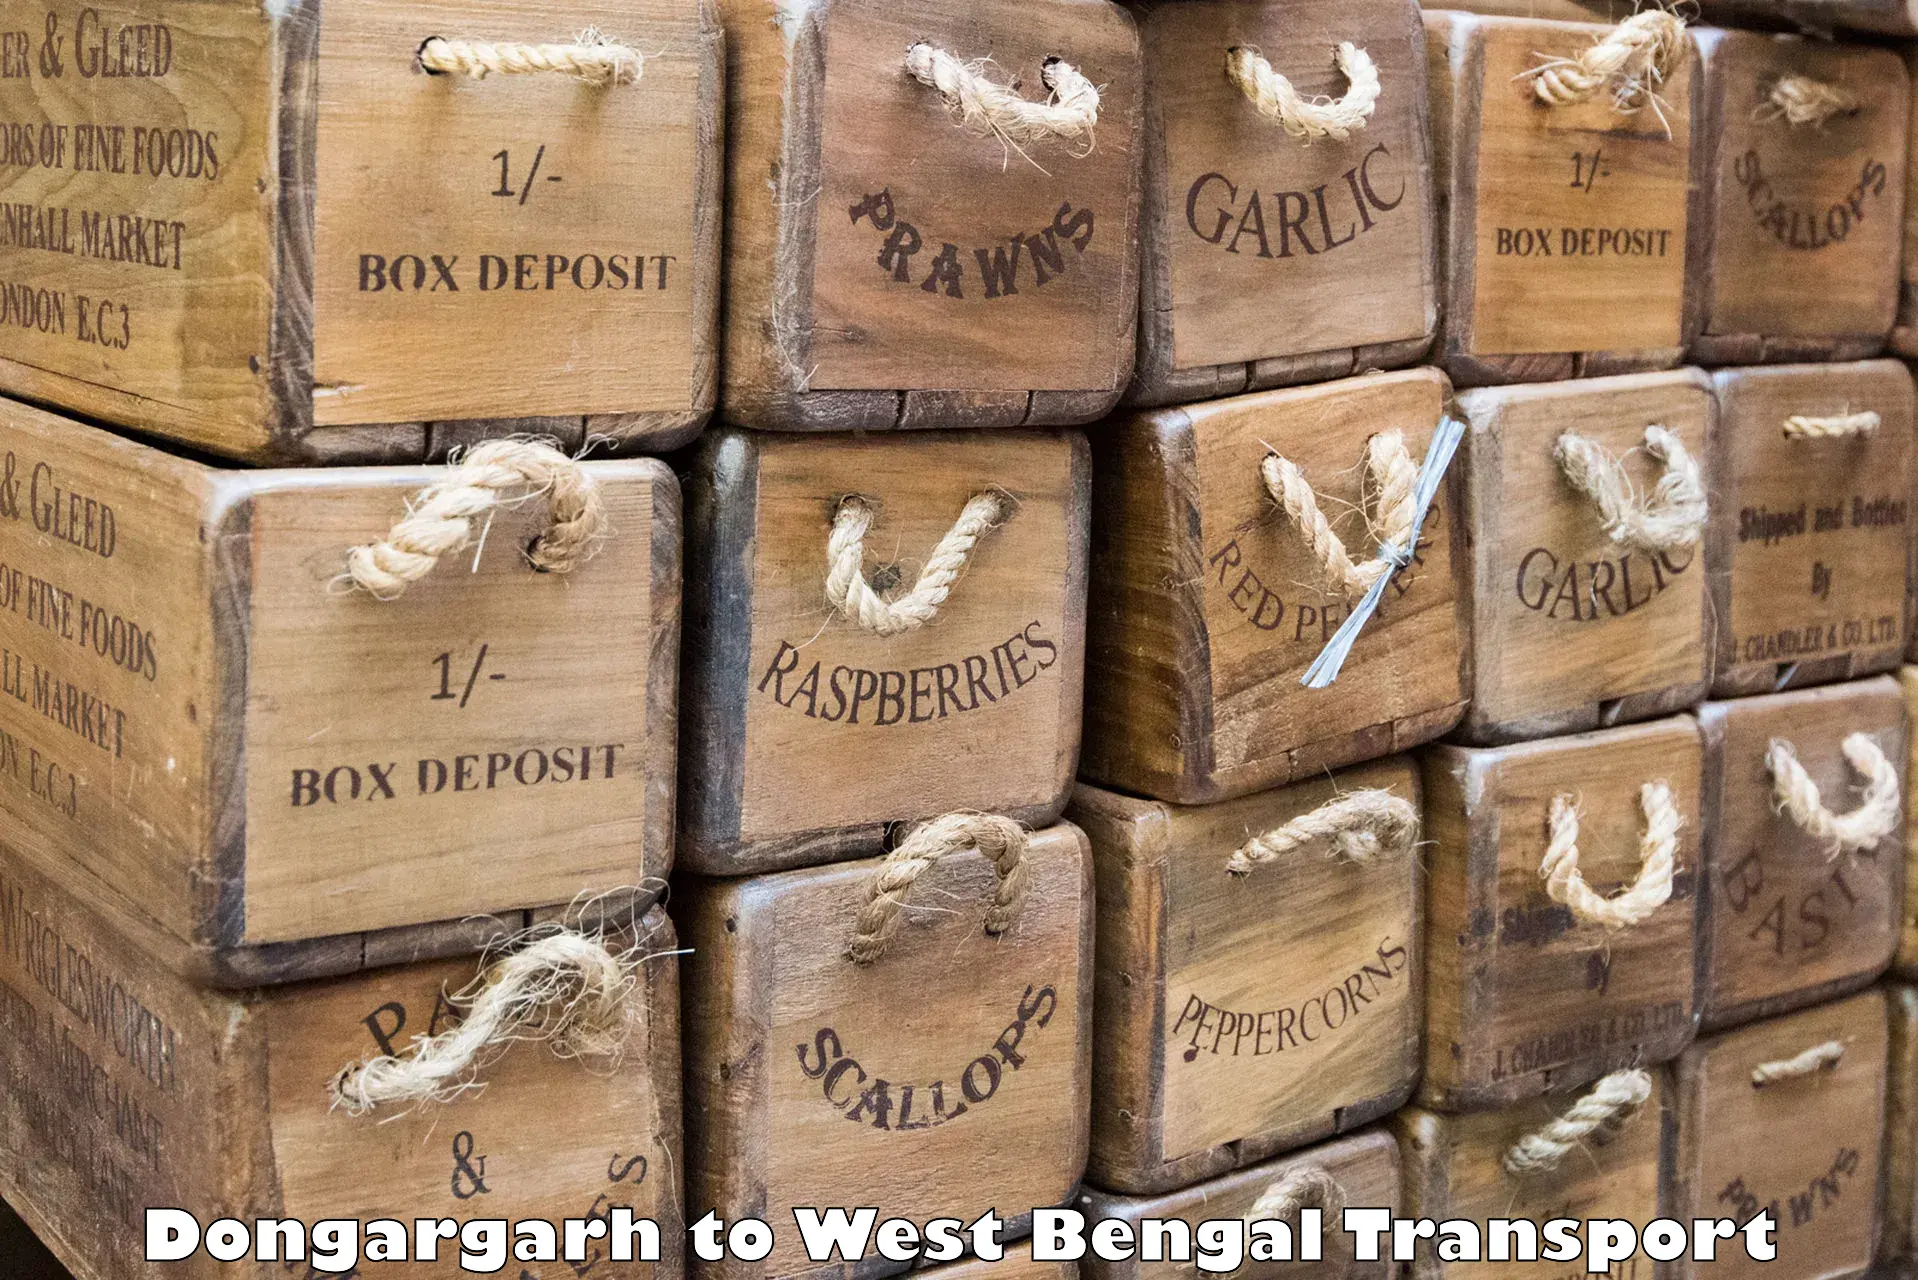 Shipping services Dongargarh to Sitai